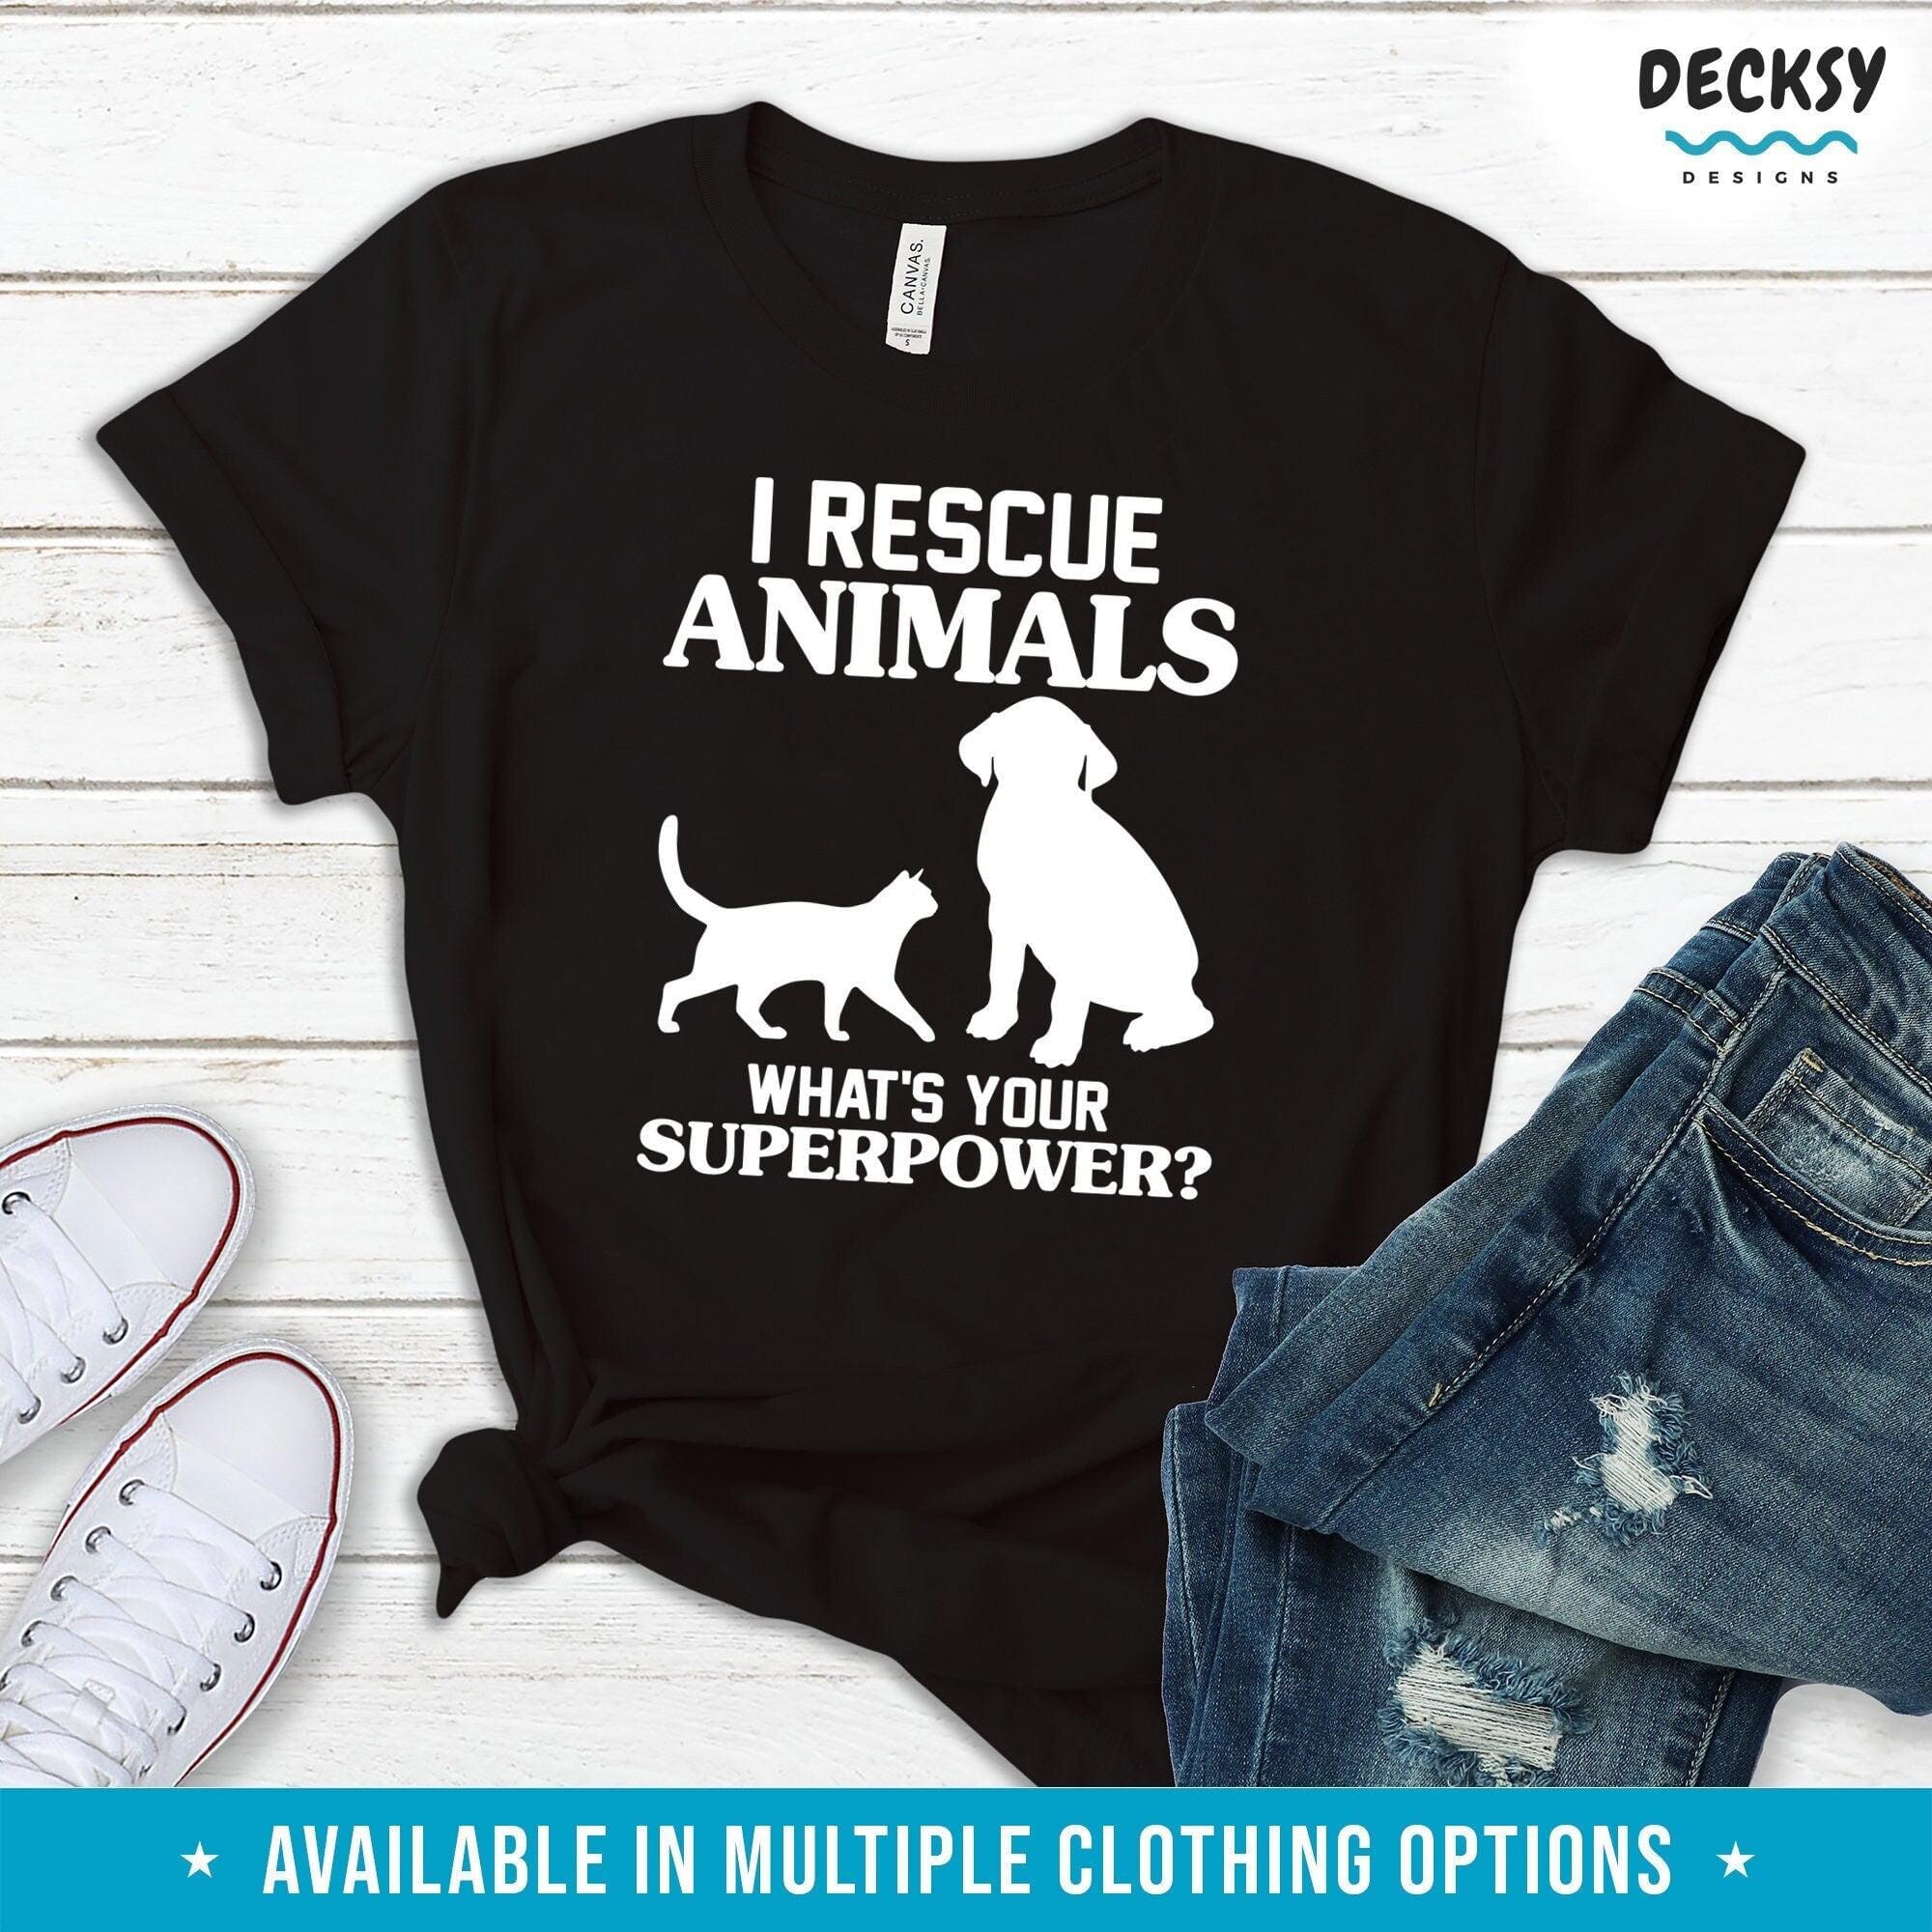 Animal Rescue Shirt, Pet Adoption Gift, Animal Shelter Tshirt-Clothing:Gender-Neutral Adult Clothing:Tops & Tees:T-shirts:Graphic Tees-DecksyDesigns